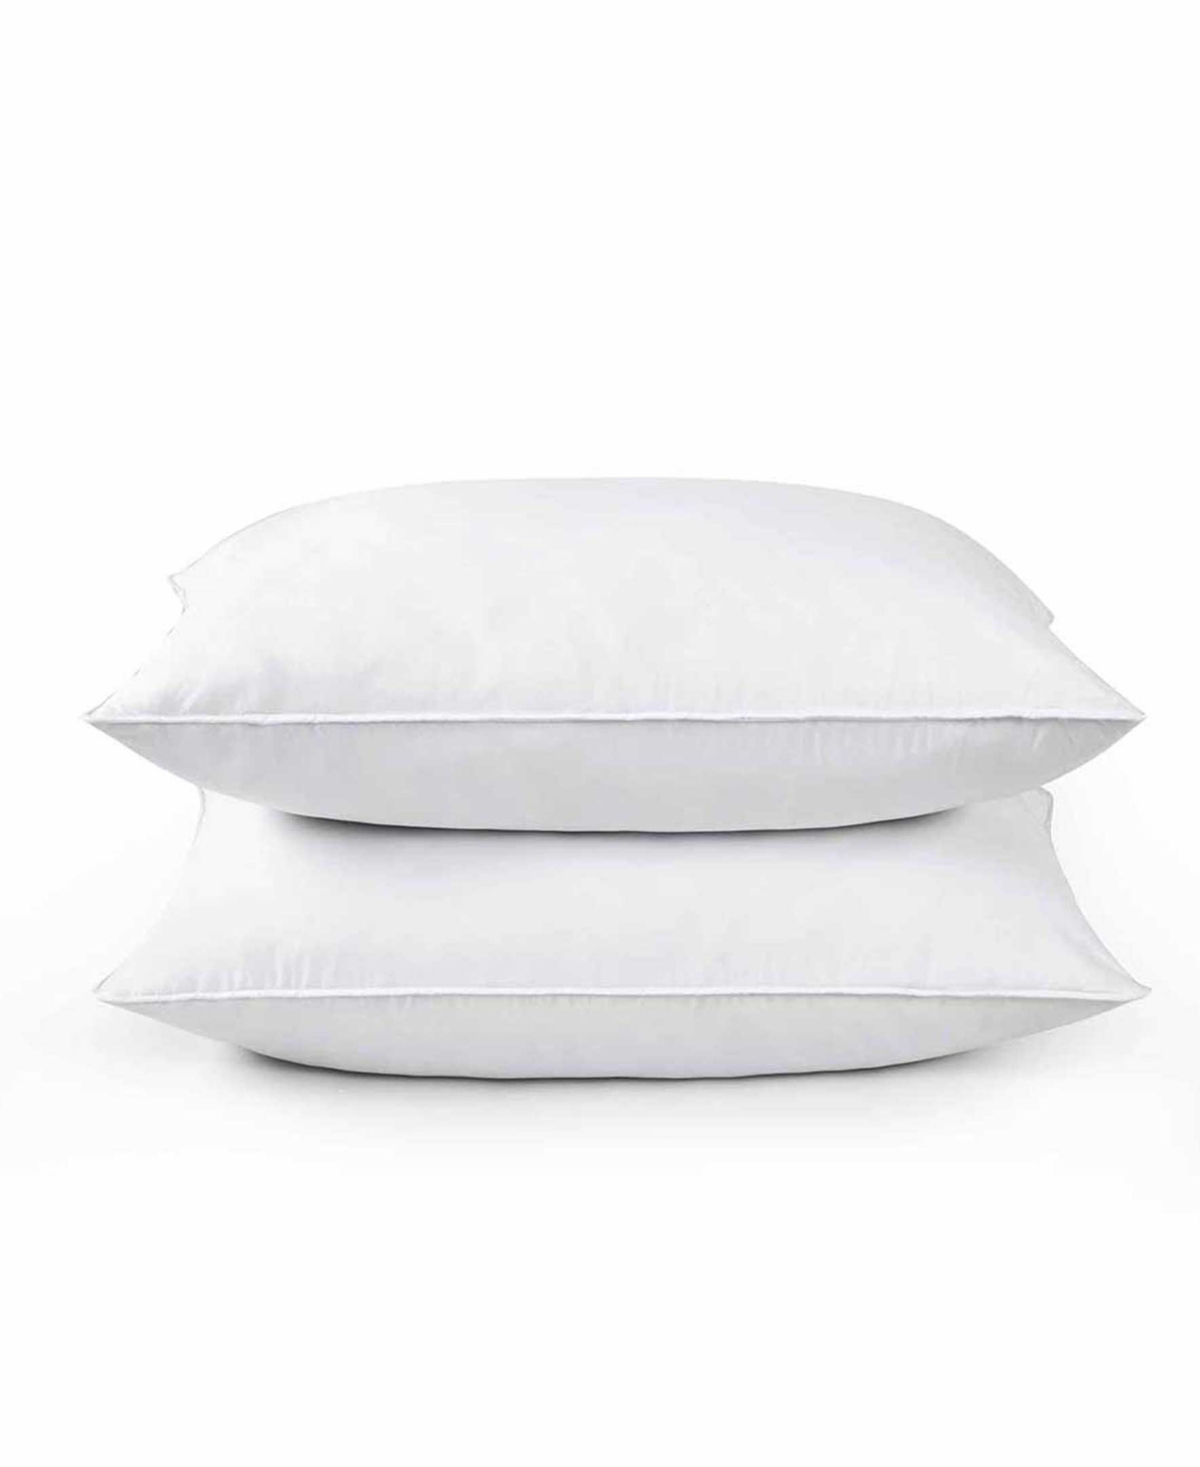 Unikome Medium Firm Goose Feather And Down Pillows, 2-pack, Queen In White